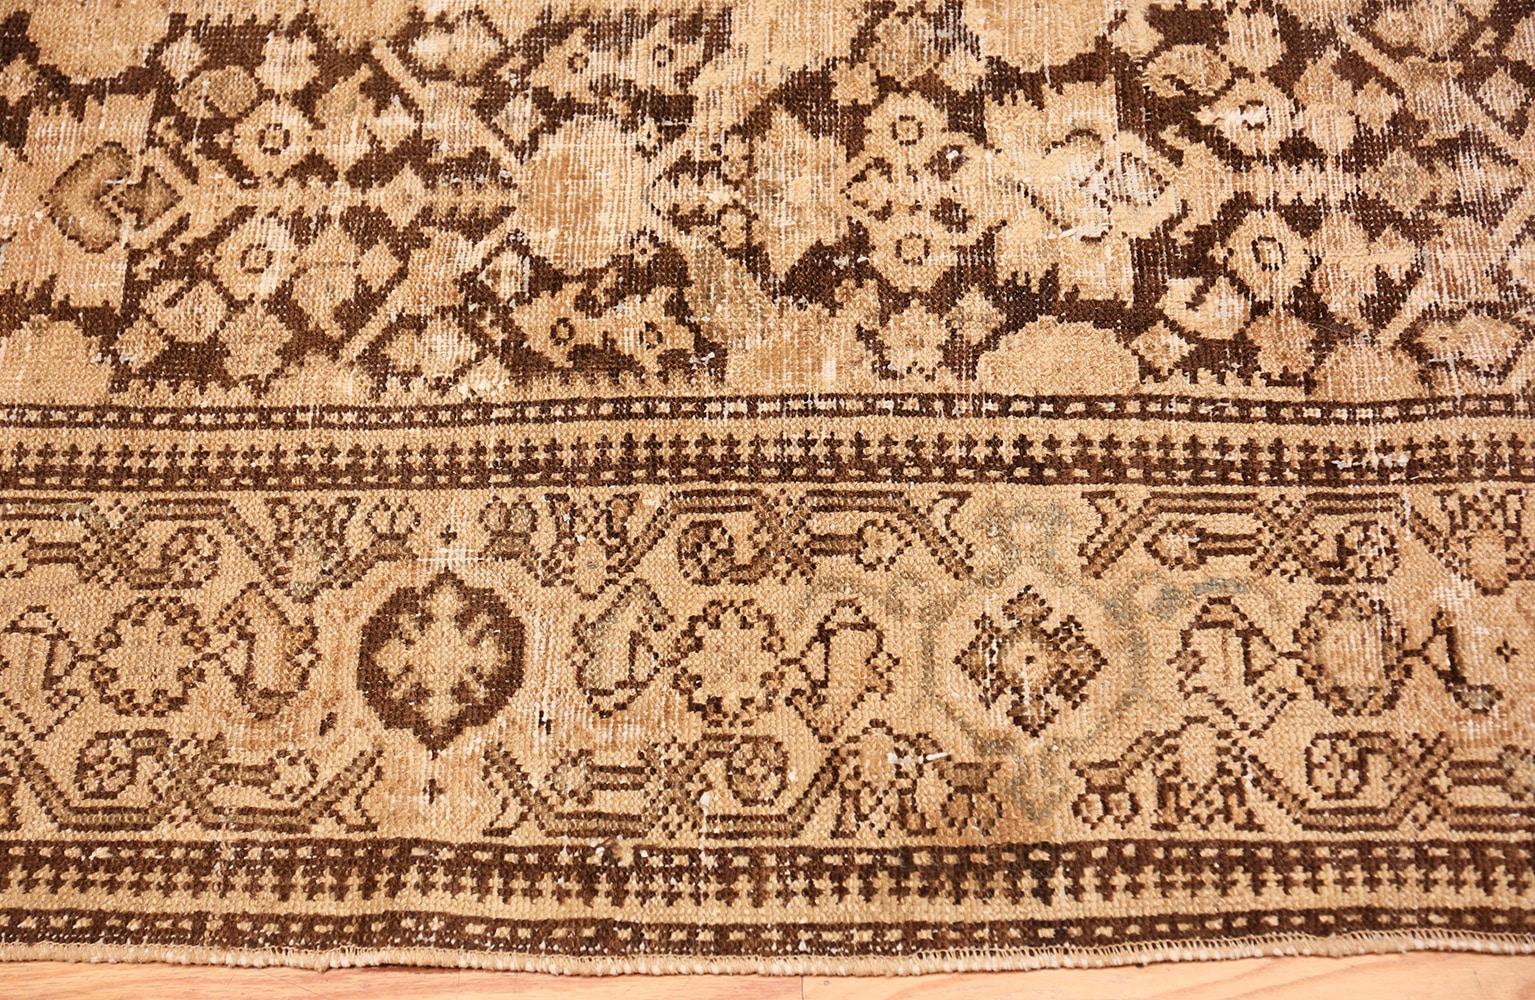 Hand-Knotted Antique Persian Malayer Carpet. Size: 4 ft 10 in x 9 ft 8 in (1.47 m x 2.95 m)